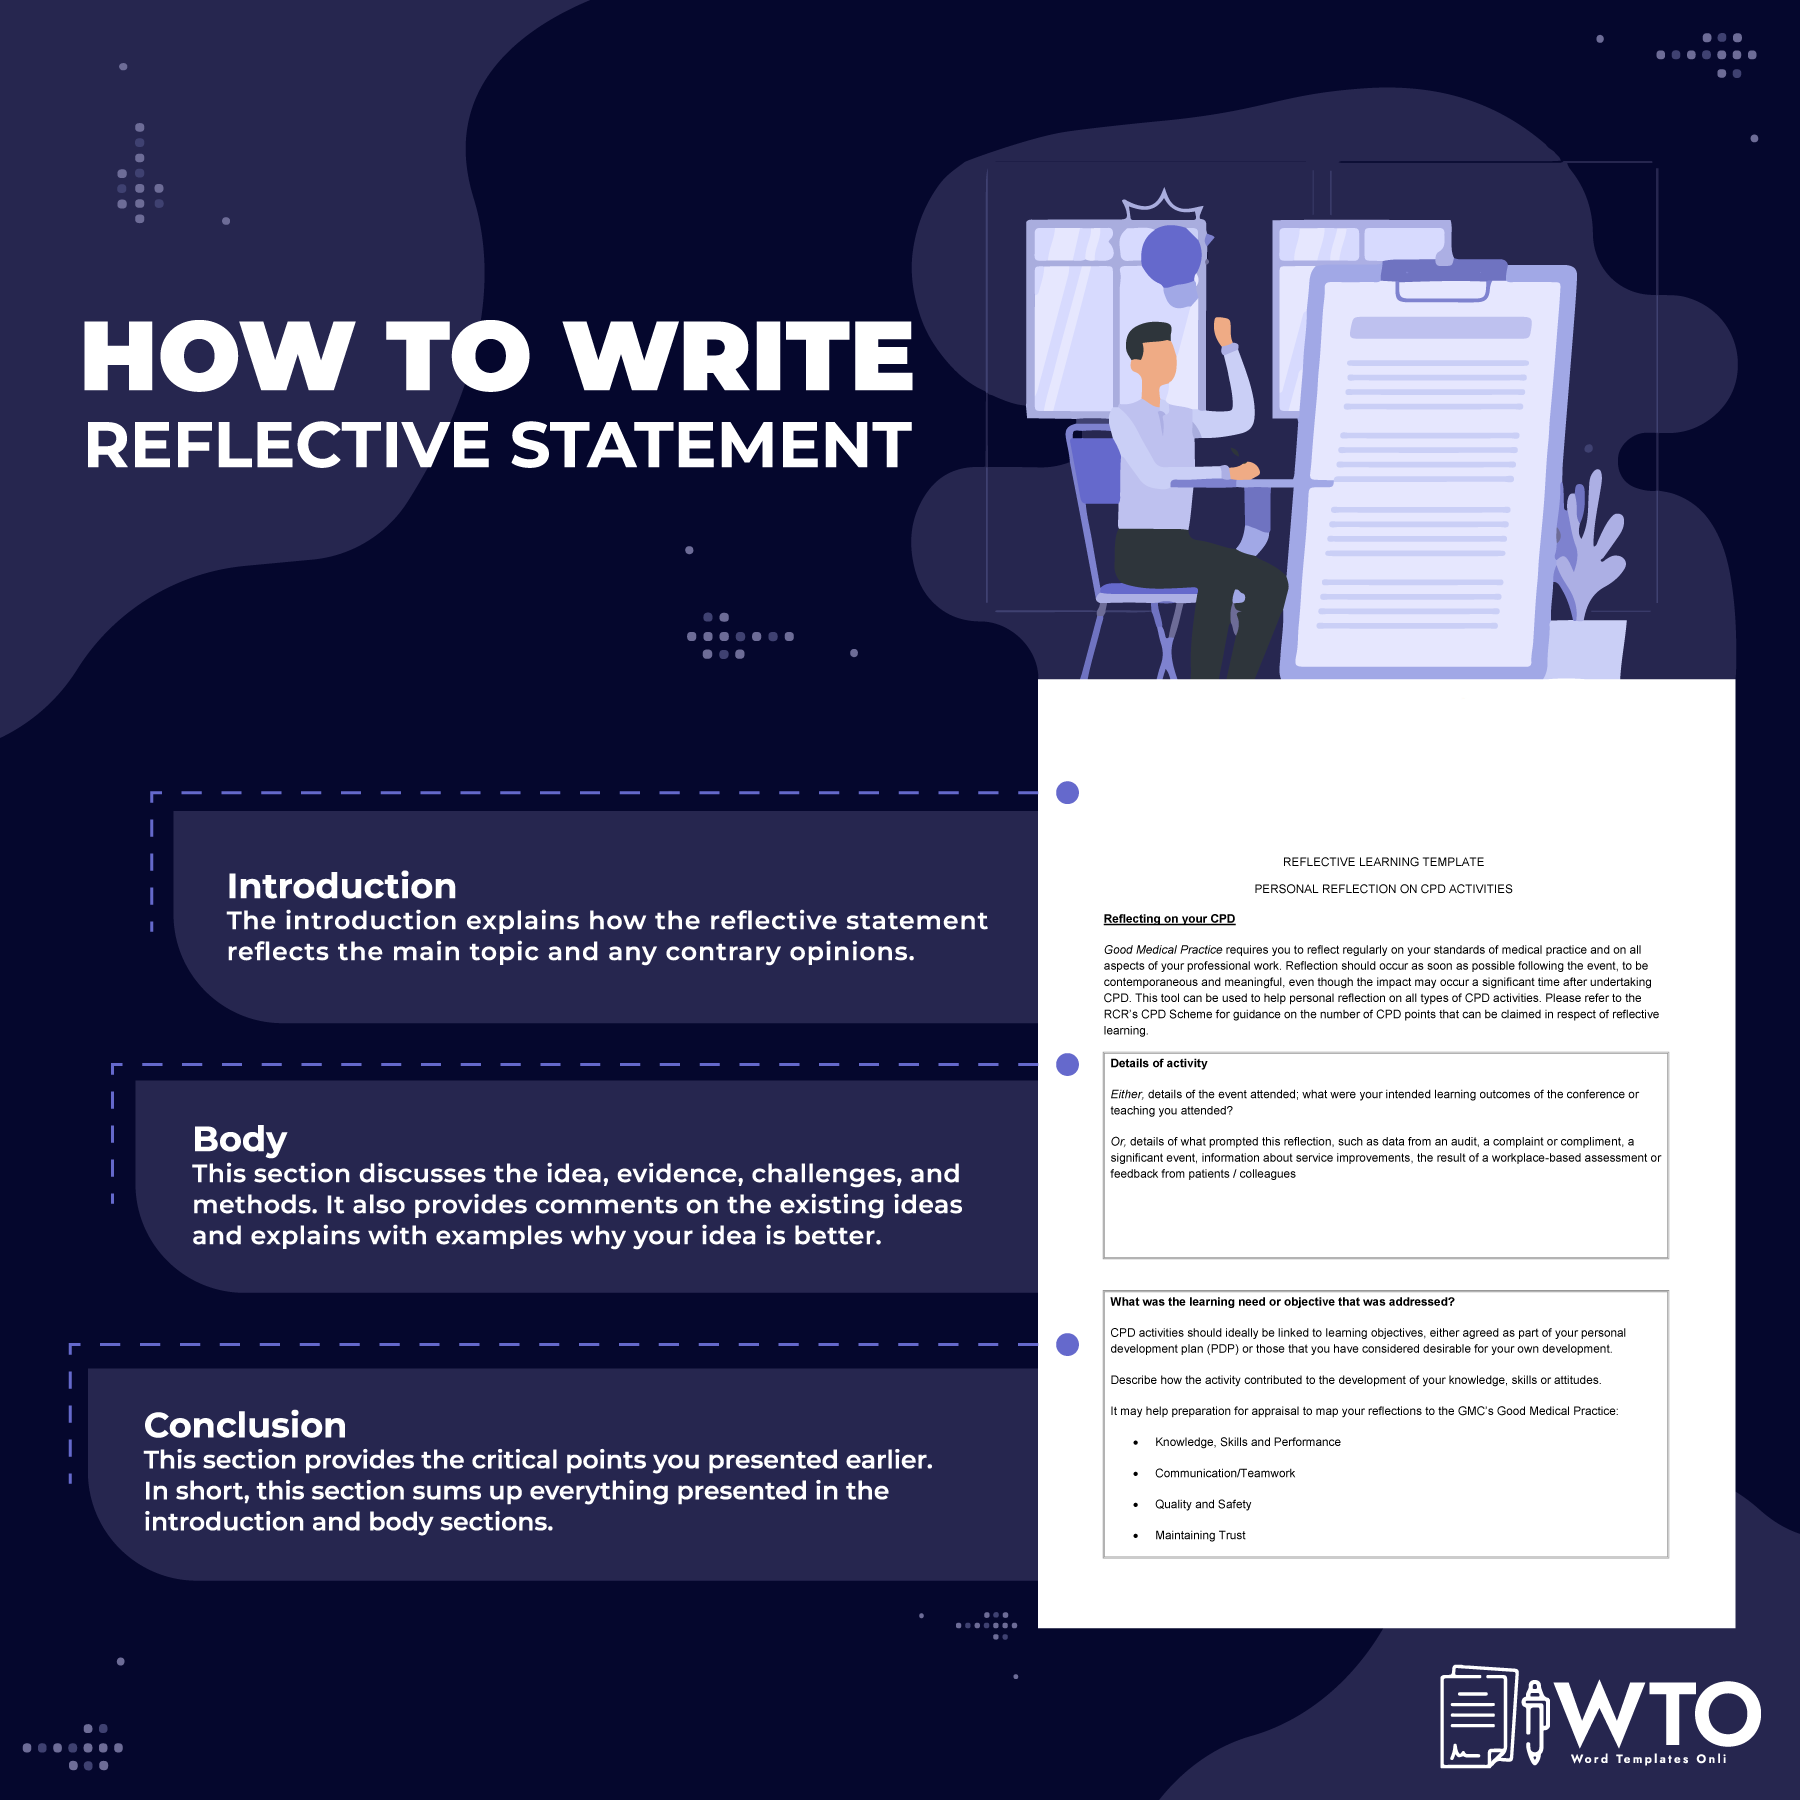 This infographic is about how to write Reflective Statement.